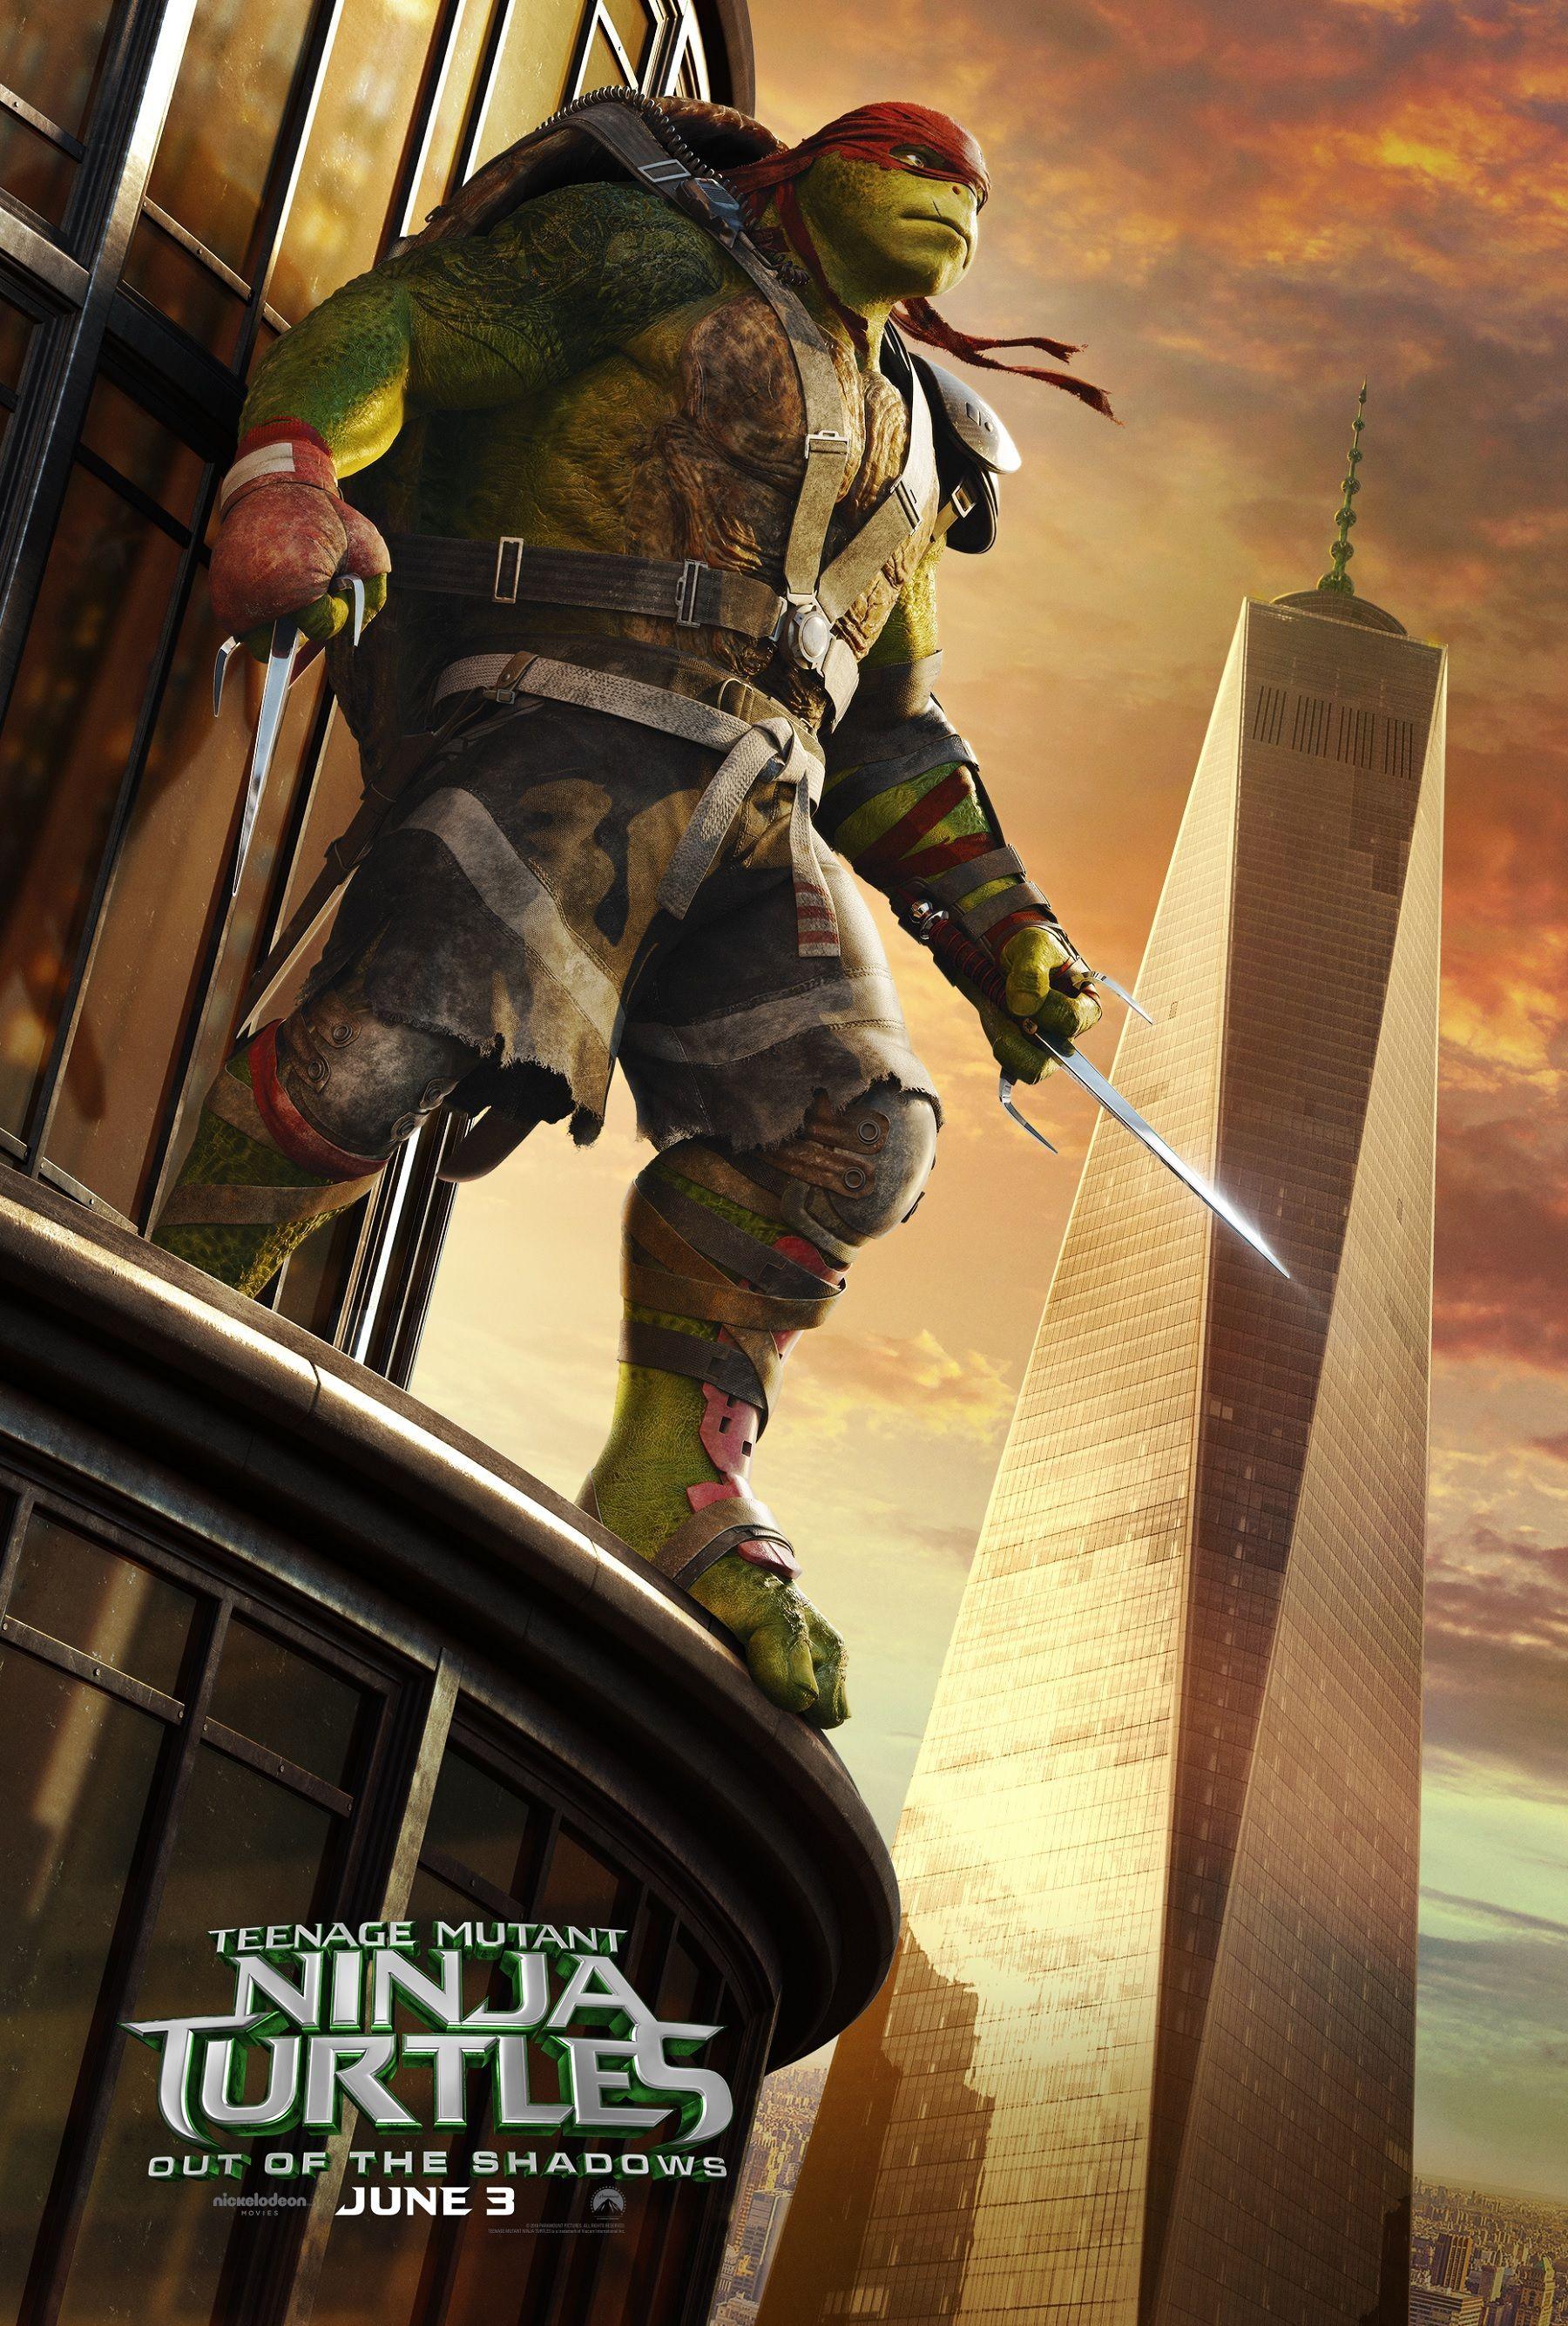 All Movie Posters and Prints for Teenage Mutant Ninja Turtles: Out